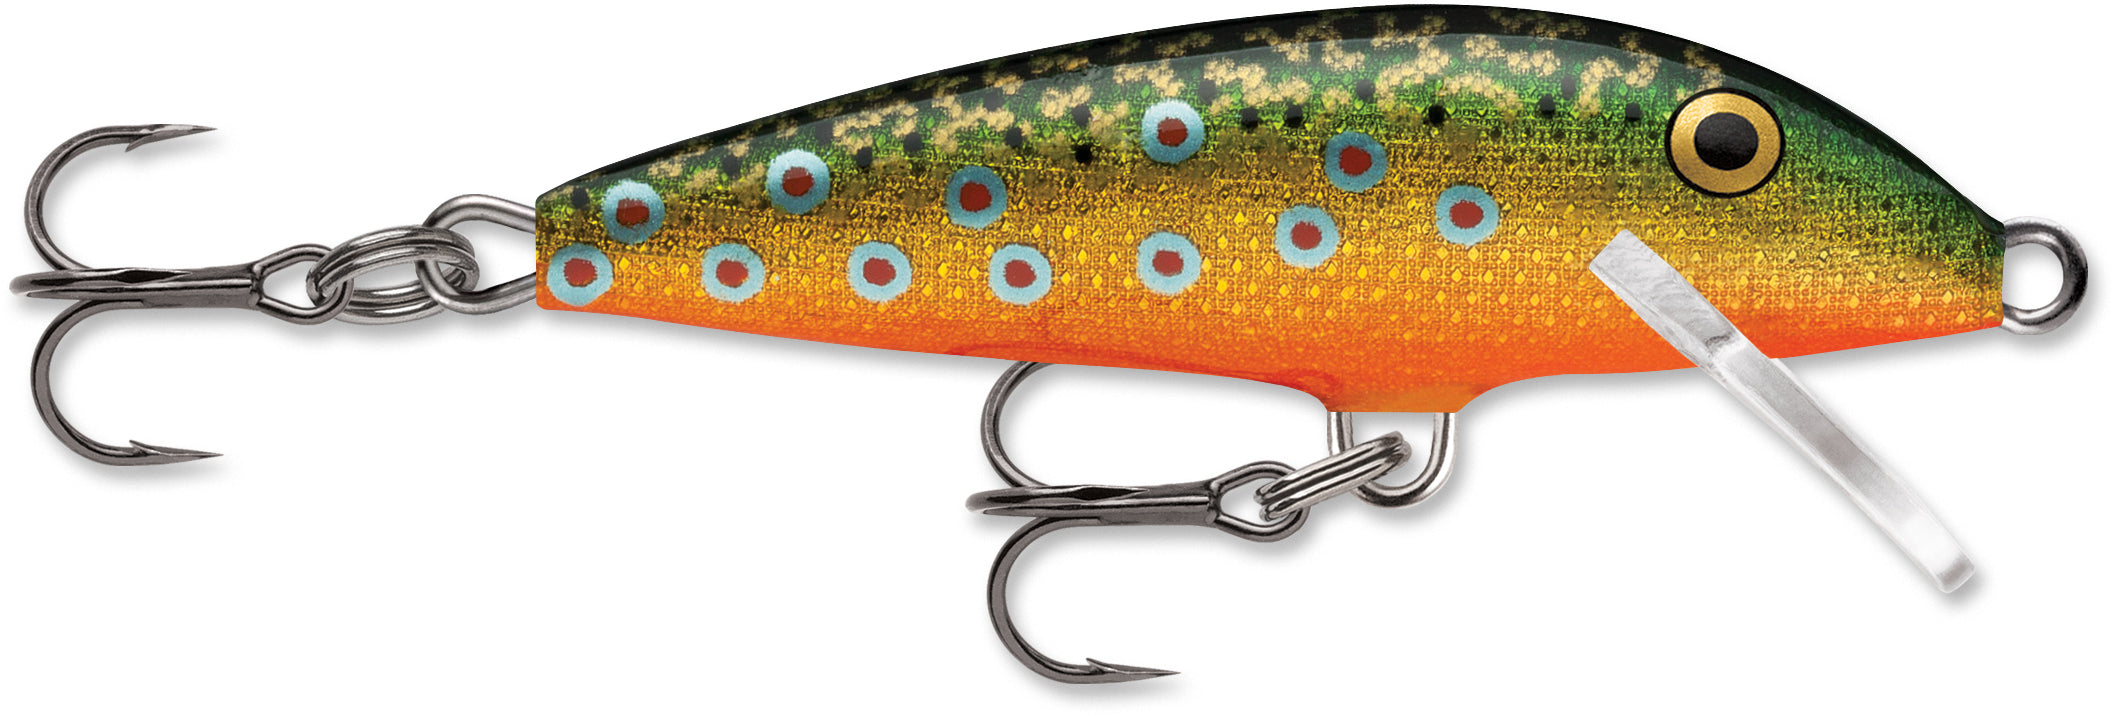 Rapala Original Floating 05 Lure - 2 Inches Brown Trout